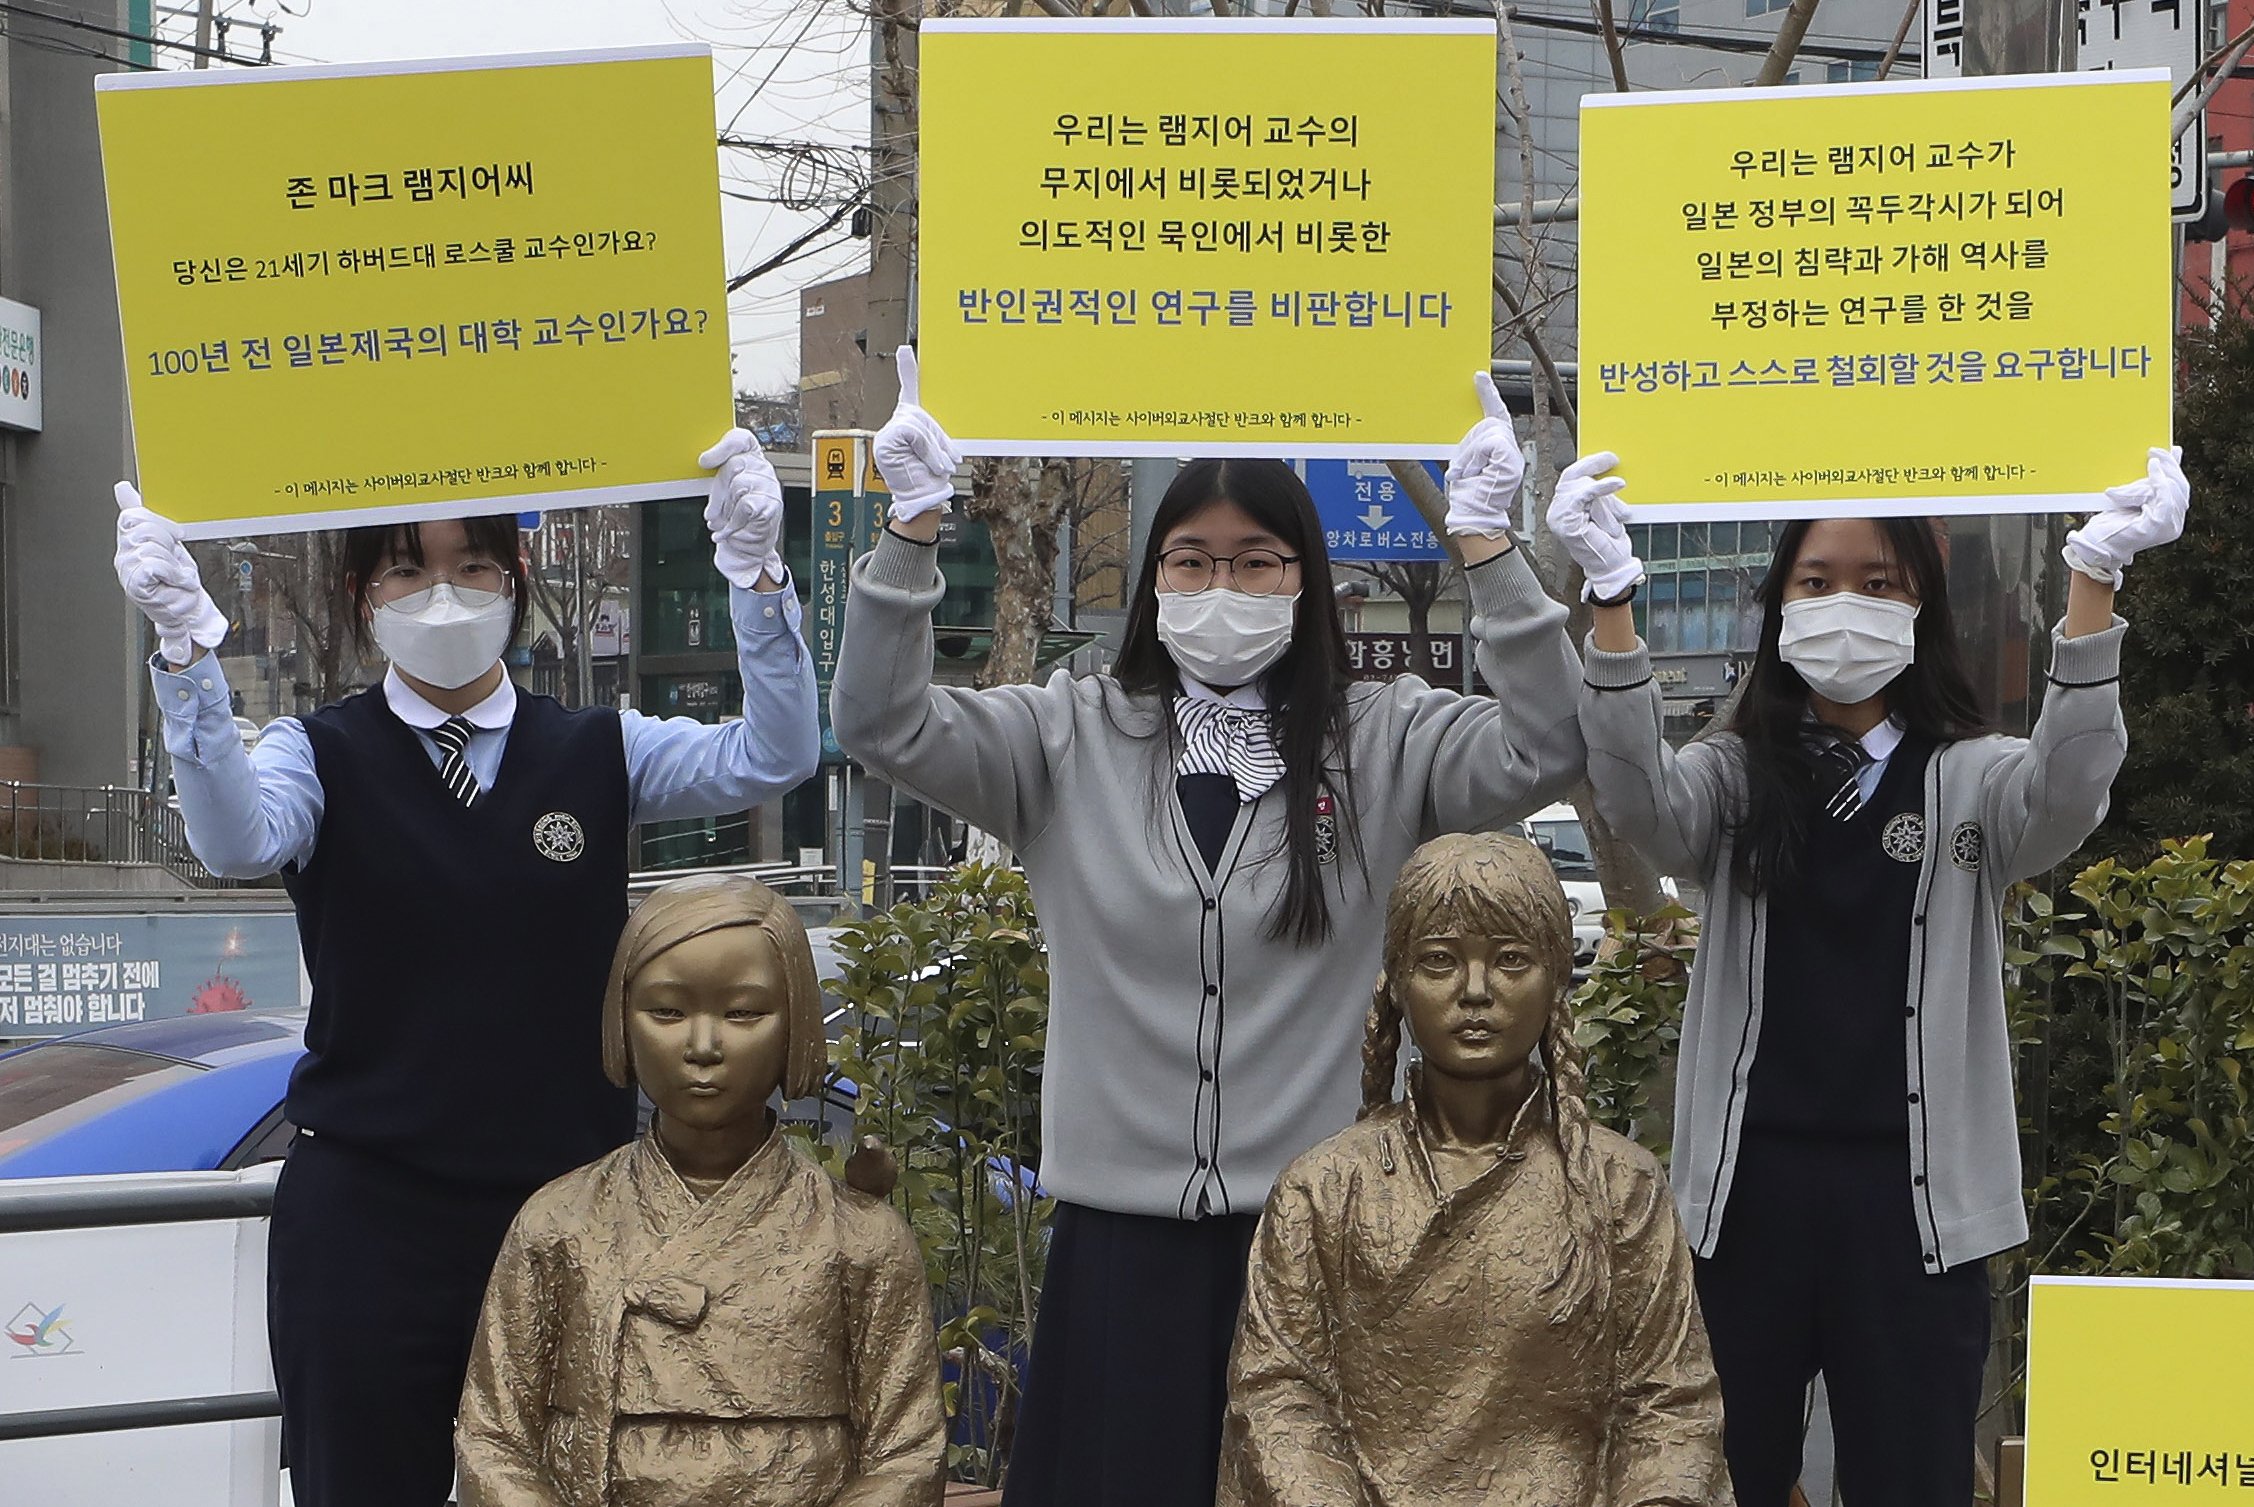 Harvard professor stirs up commotion over ‘comfort women’ claims